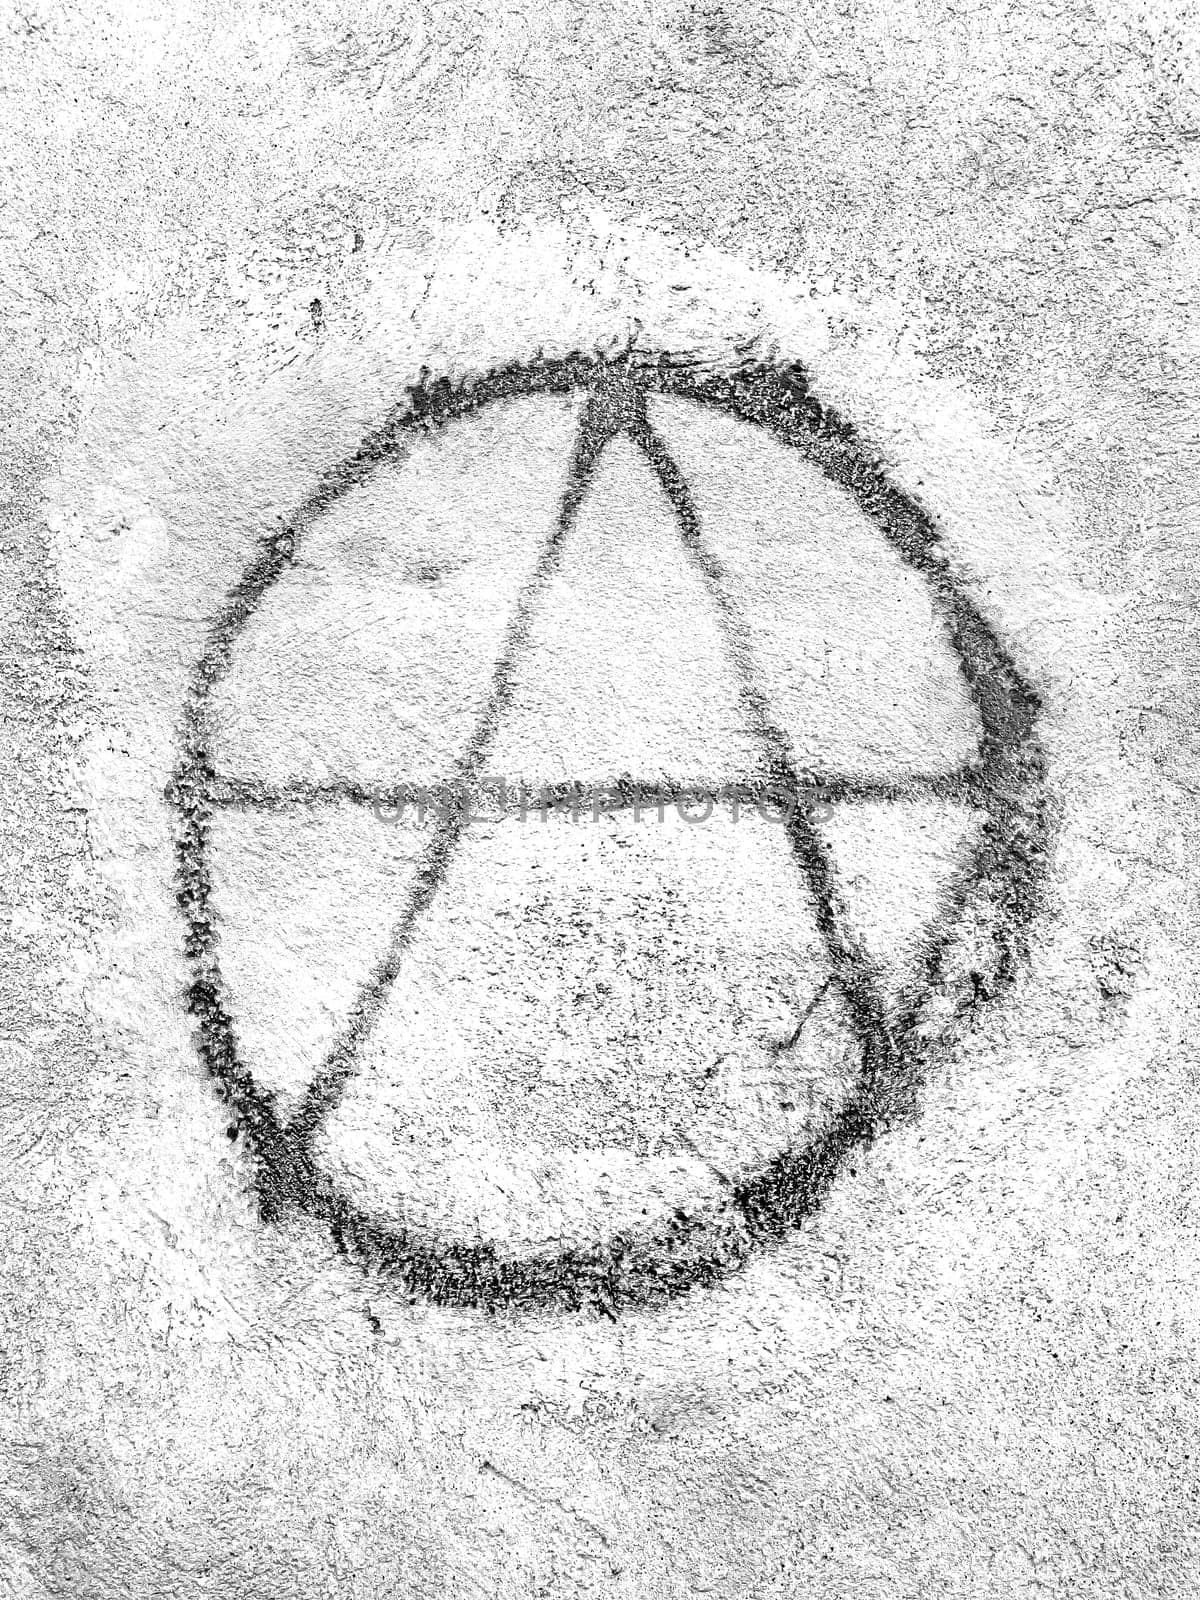 Symbol of anarchy painted on the wall. Graffiti.